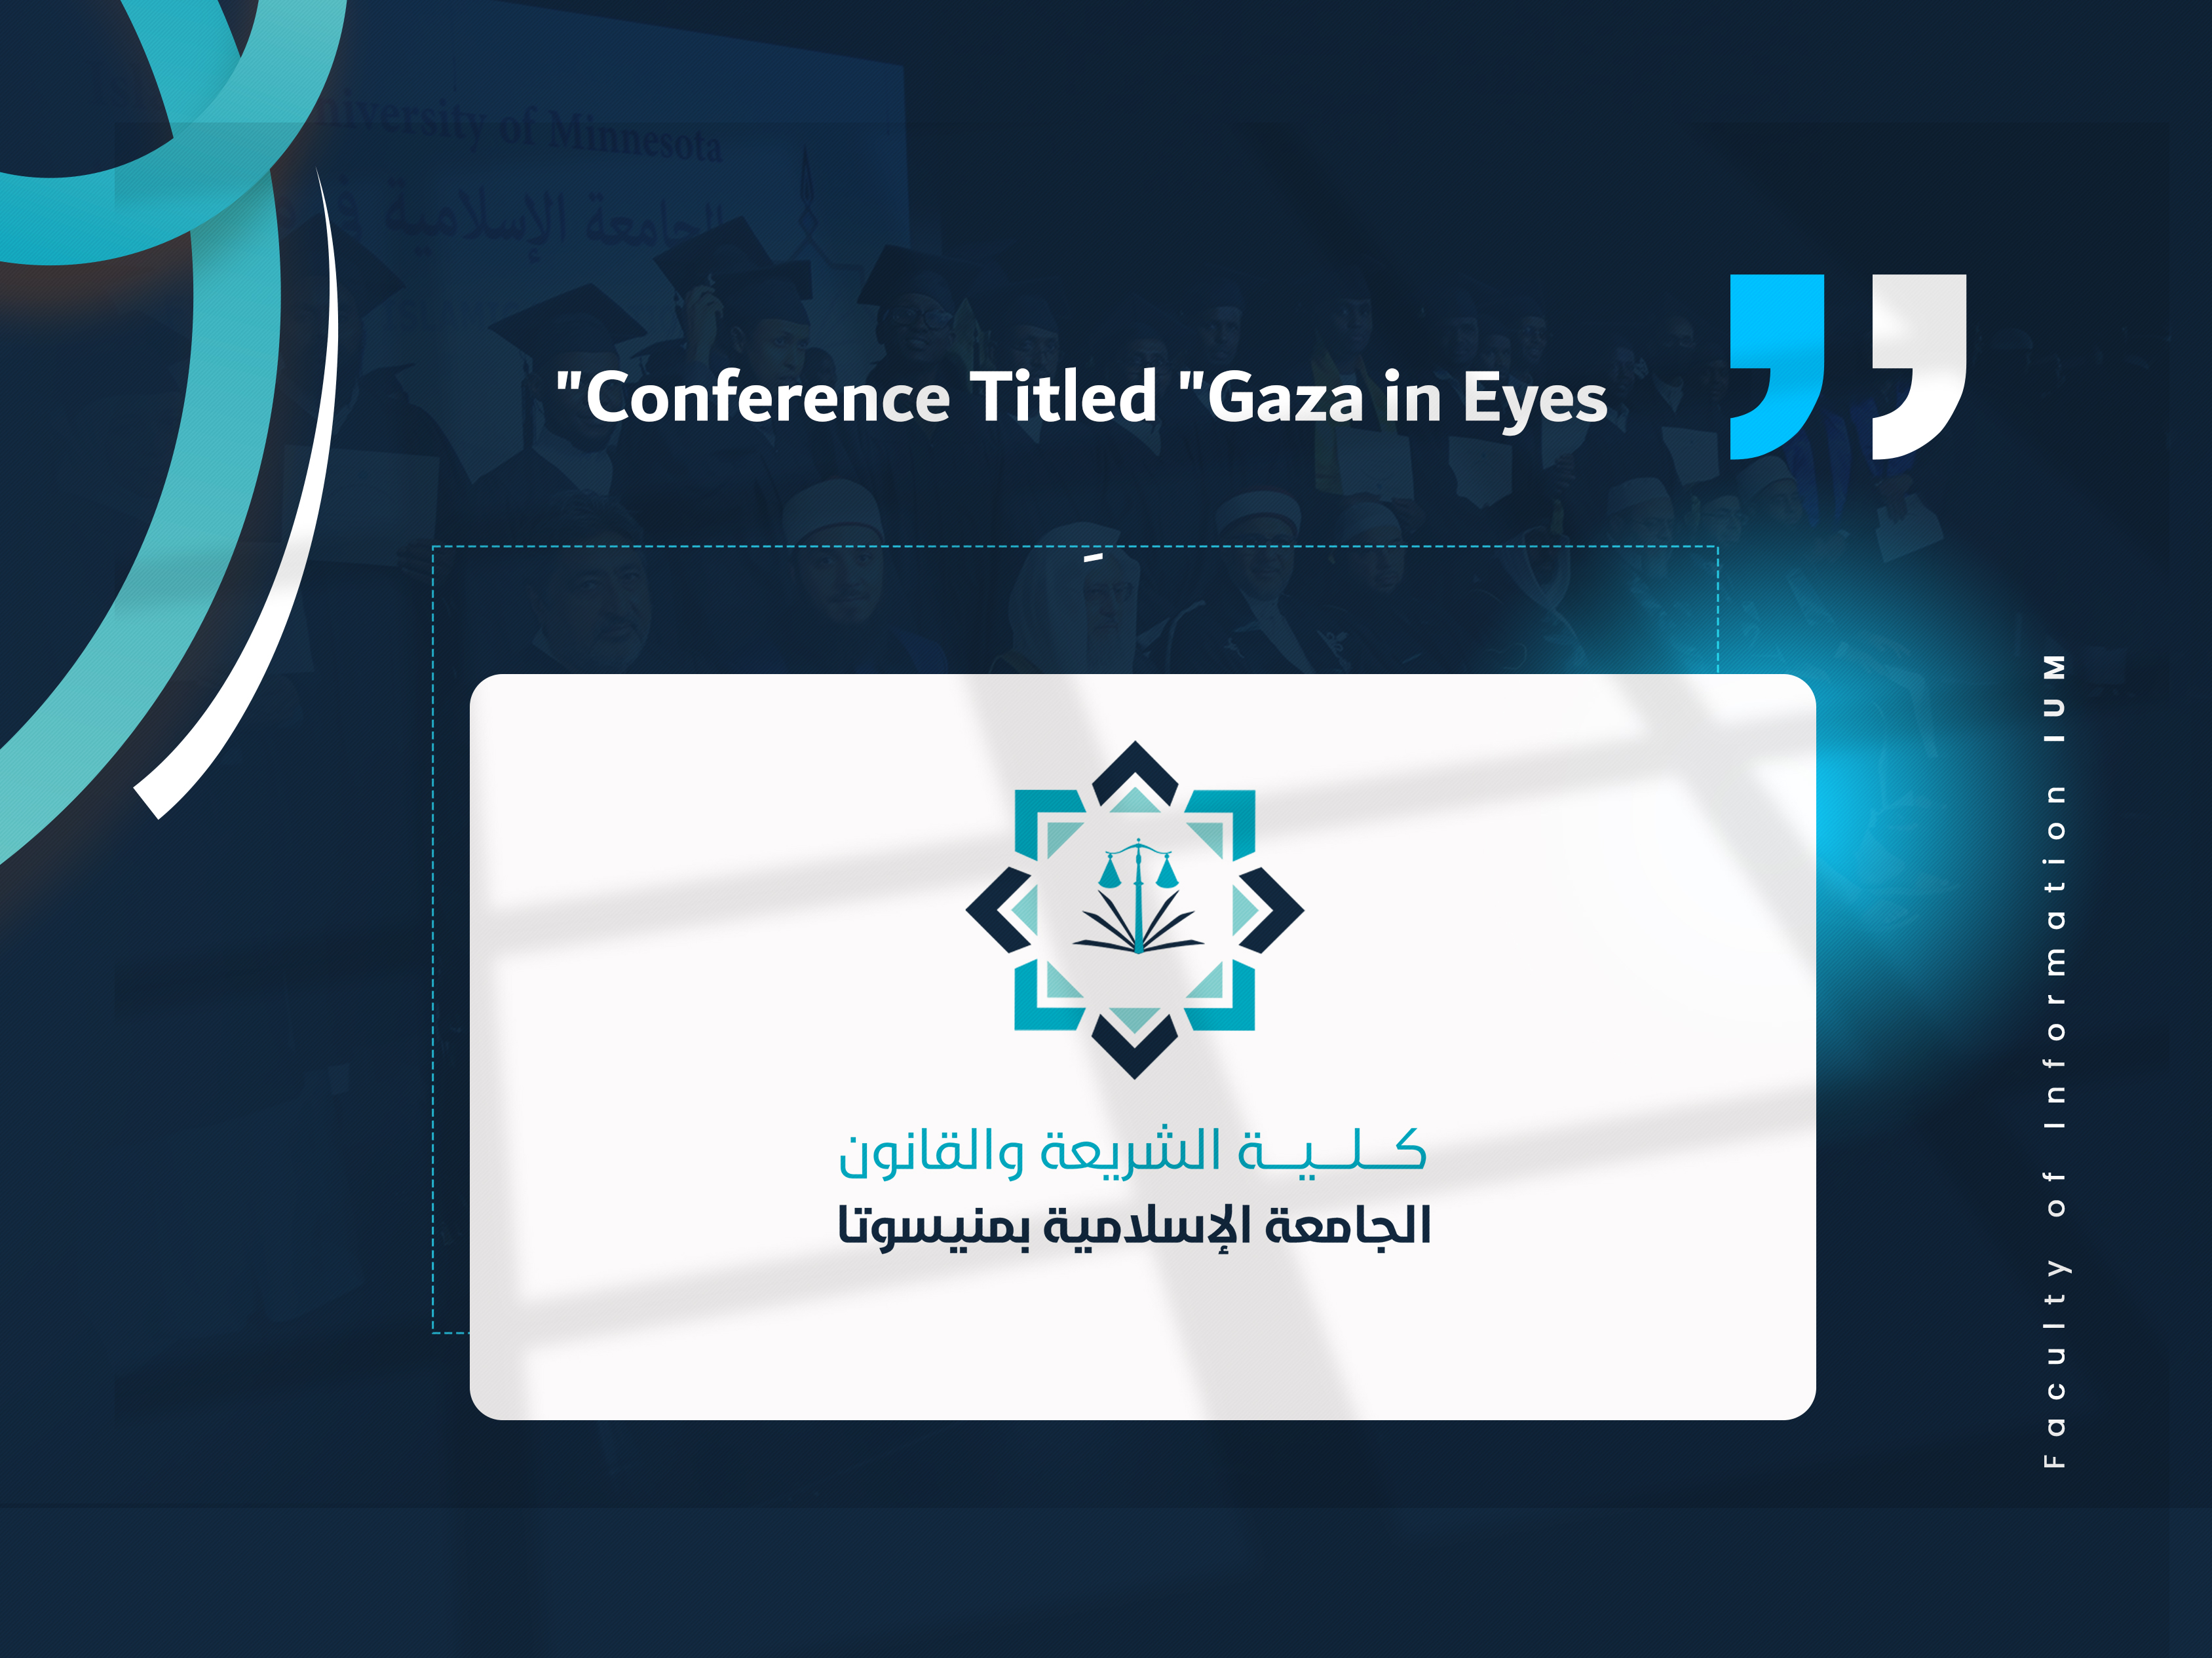 Conference Titled "Gaza in Eyes"